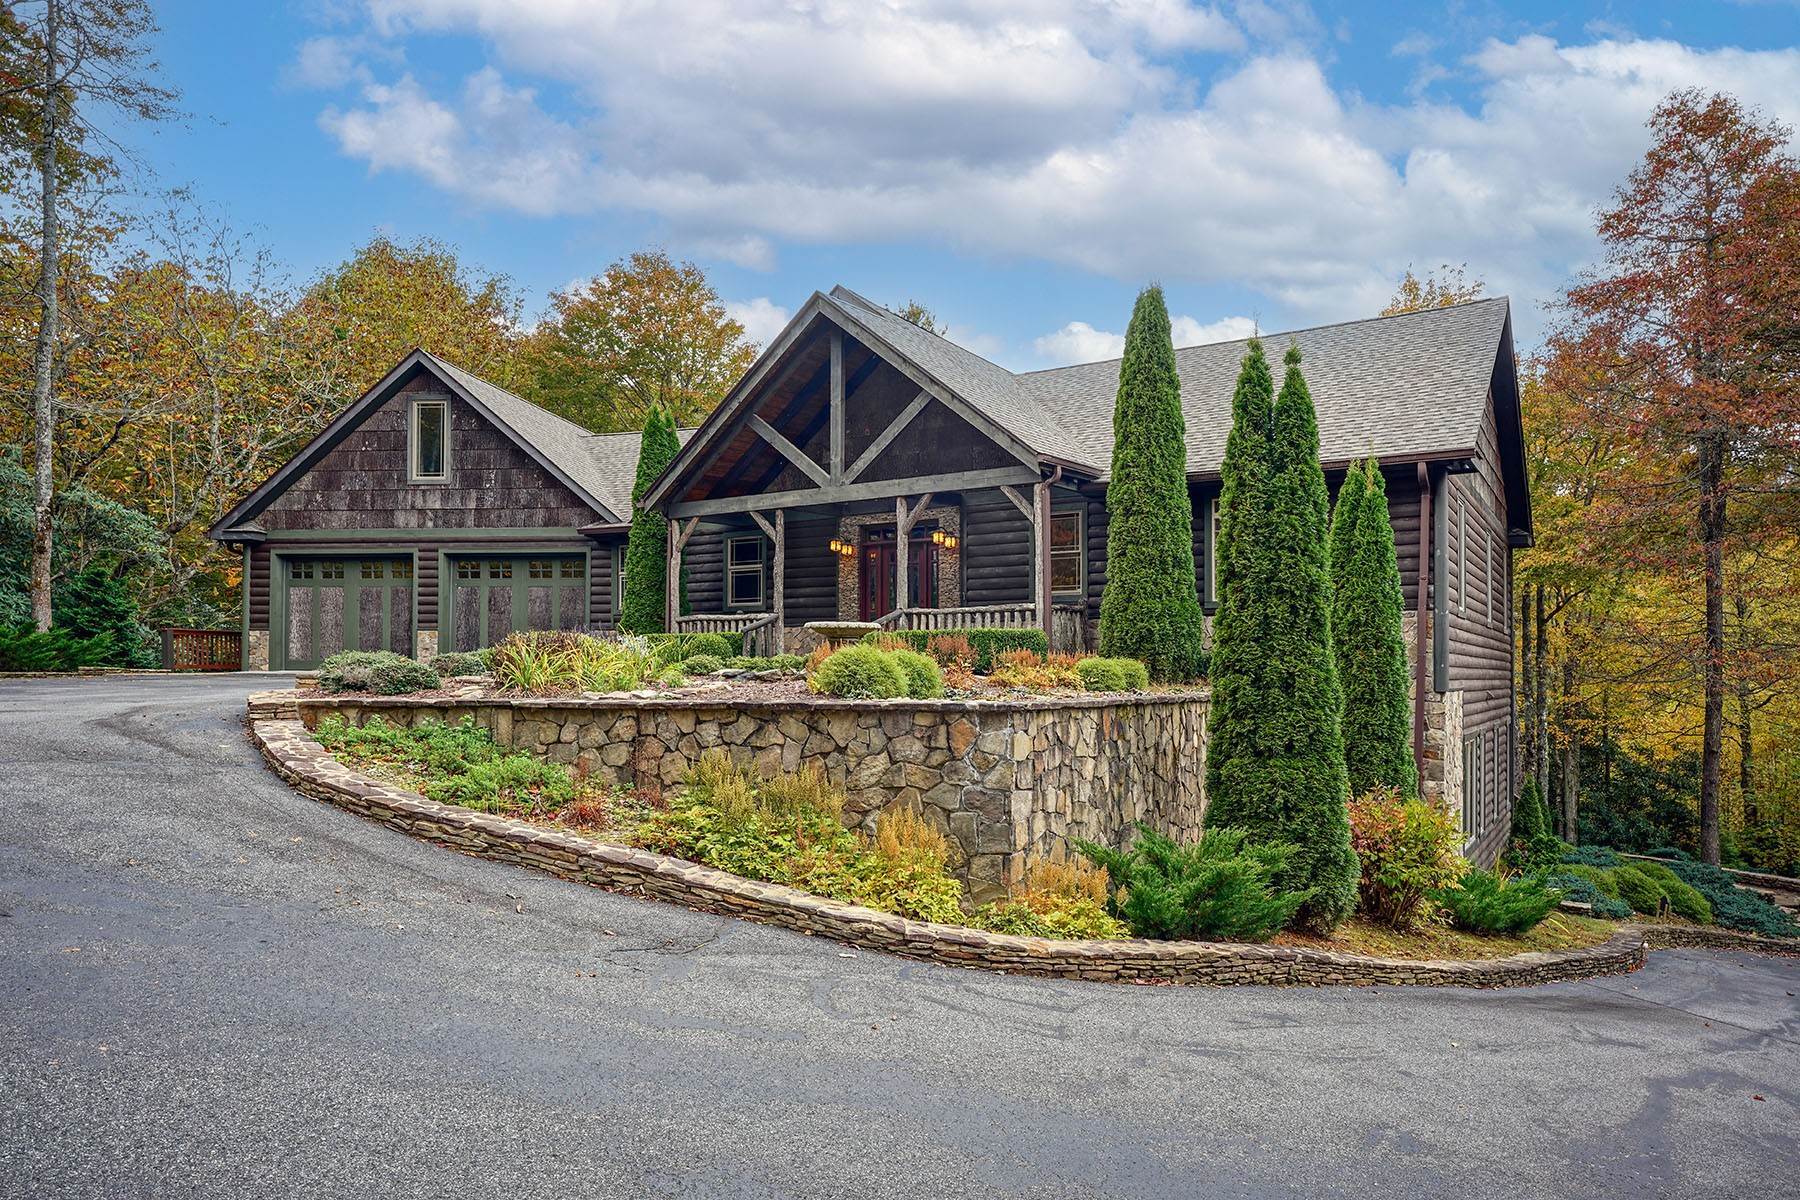 Single Family Homes for Sale at ARROWHEAD - BLOWING ROCK 145 Brave Hawk Blowing Rock, North Carolina 28605 United States